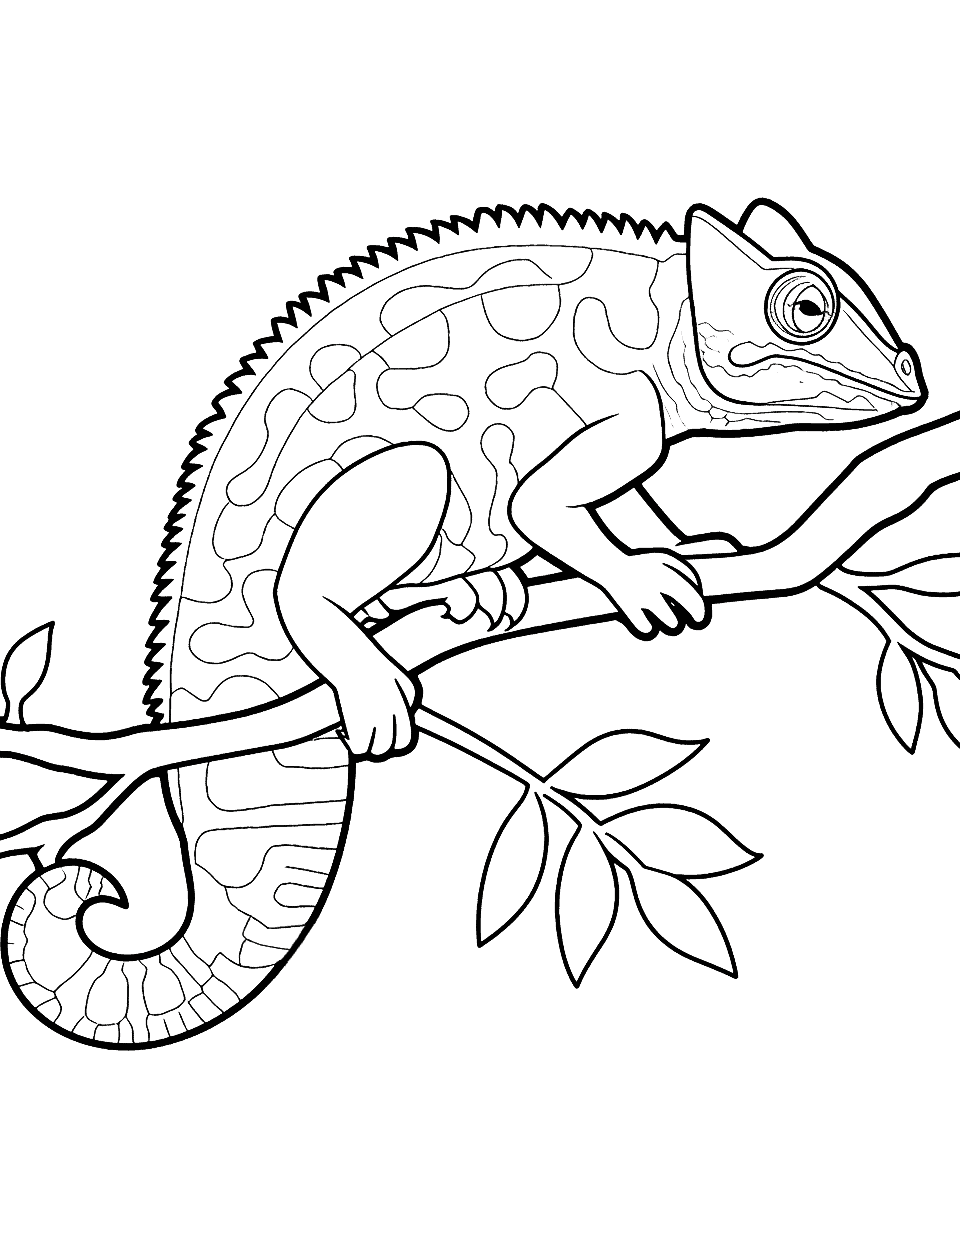 Curious Chameleon Animal Coloring Page - A chameleon clinging to a branch, its colors blending with the surroundings.